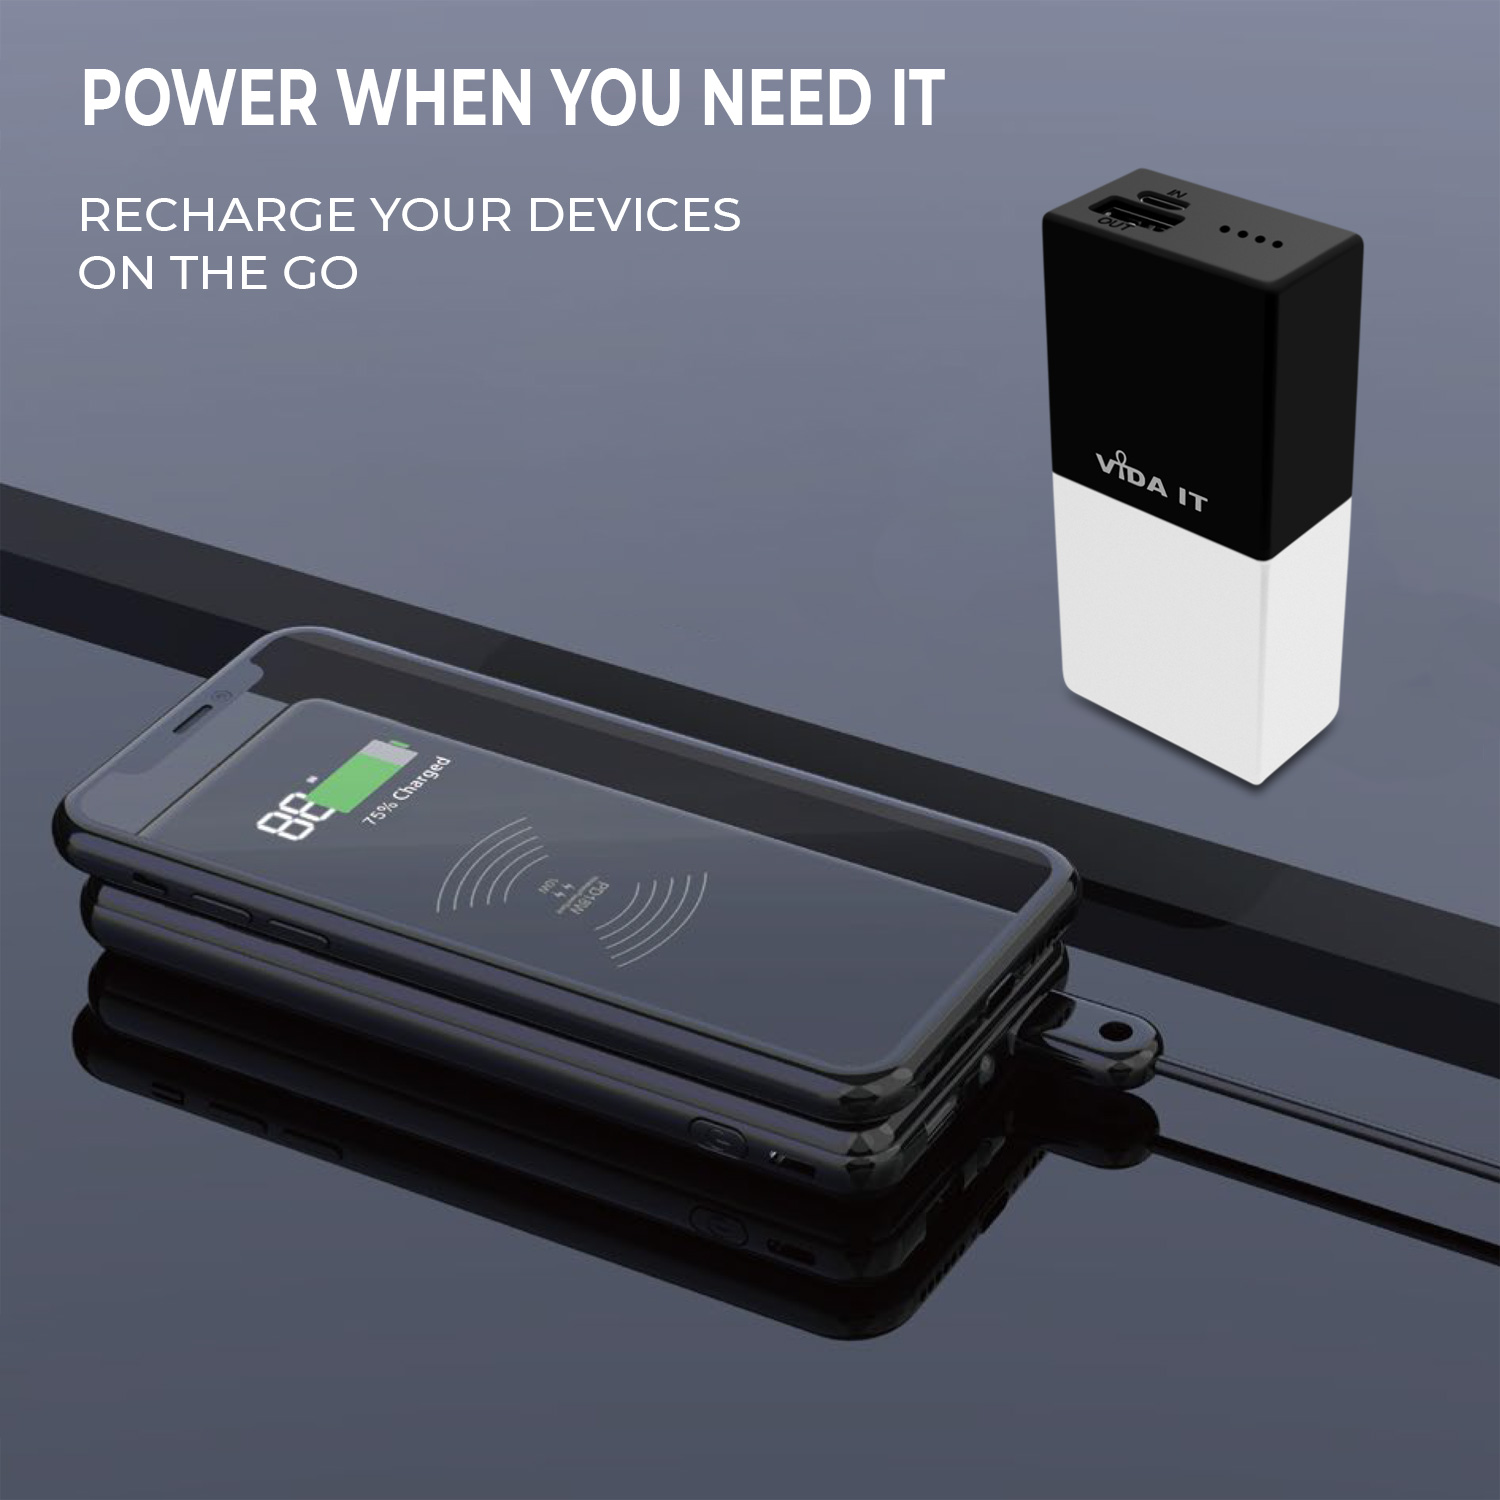 F50 - Strong Portable 5000mAh capacity Compact Power Bank Travel Emergency USB Charger External Battery Pack High Power Output 2.1A with Micro-USB charging cable and iPhone lightning and USB C type-c adapters for mobile phone smartphone.